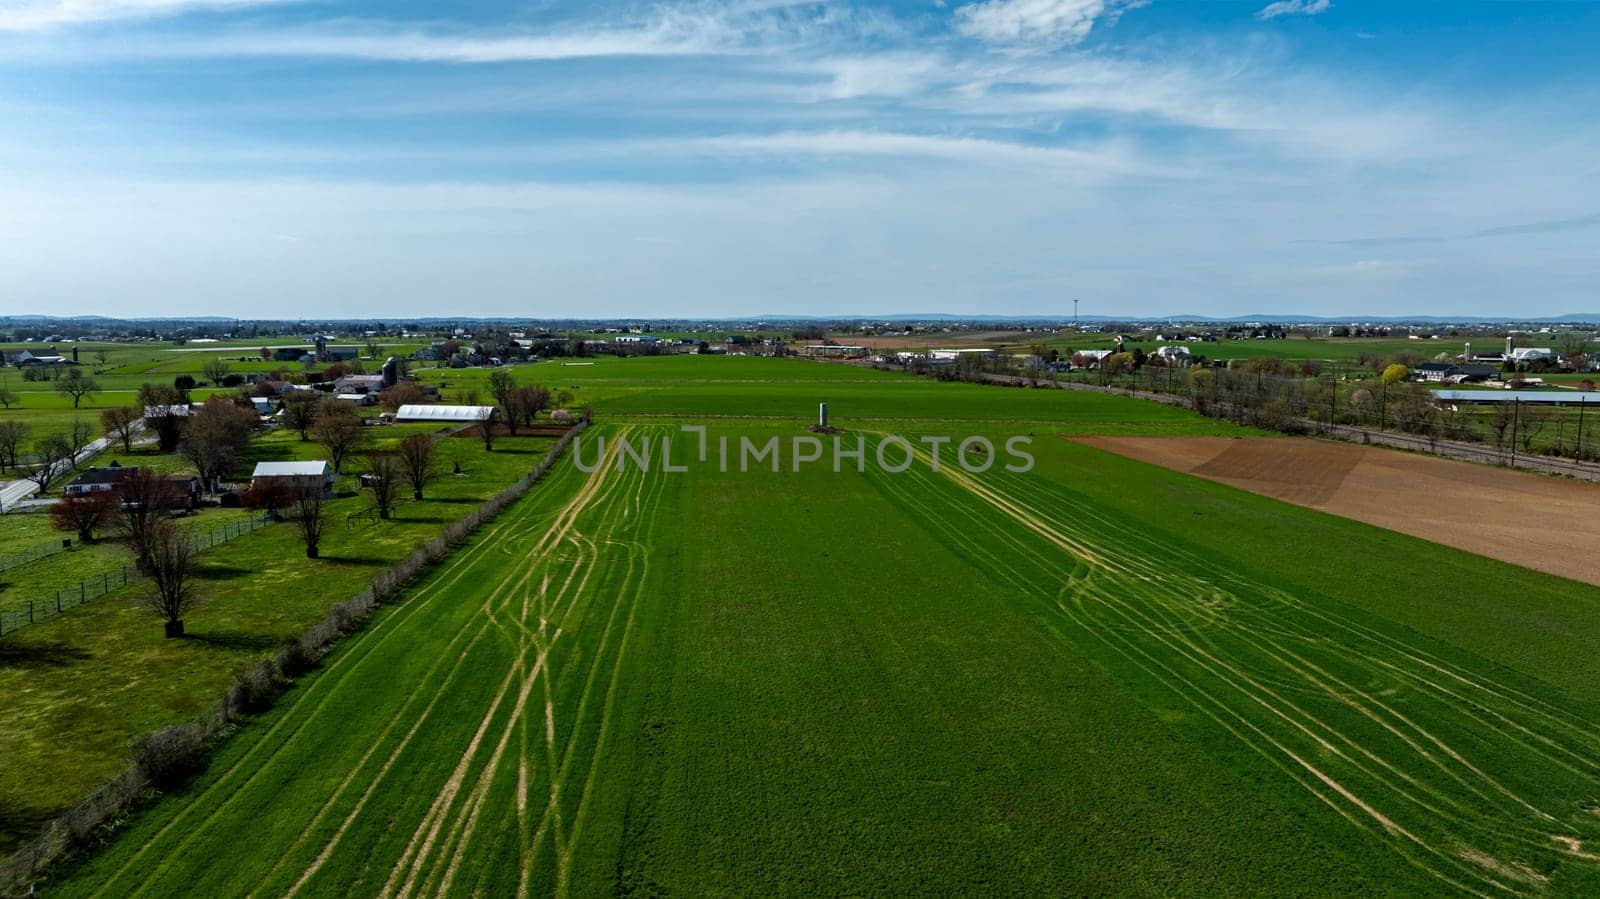 Aerial View Of A Lush, Vibrant Farm Landscape With Distinct Green Fields. by actionphoto50